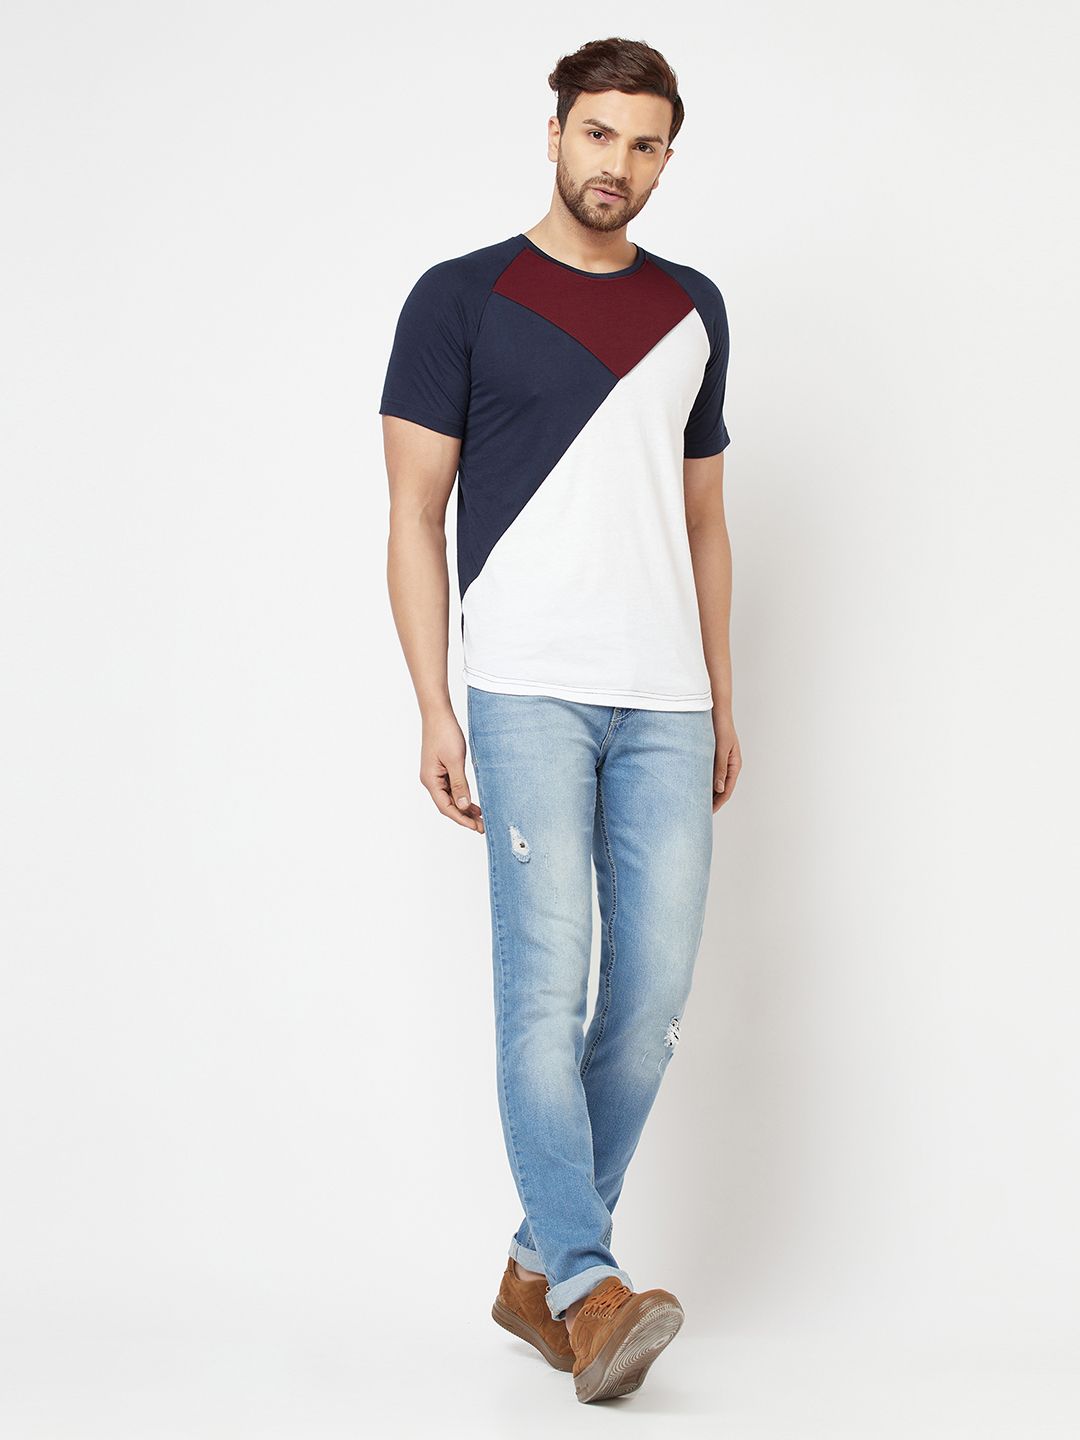 Cotton Color Block Half Sleeves Round Neck  T-Shirt